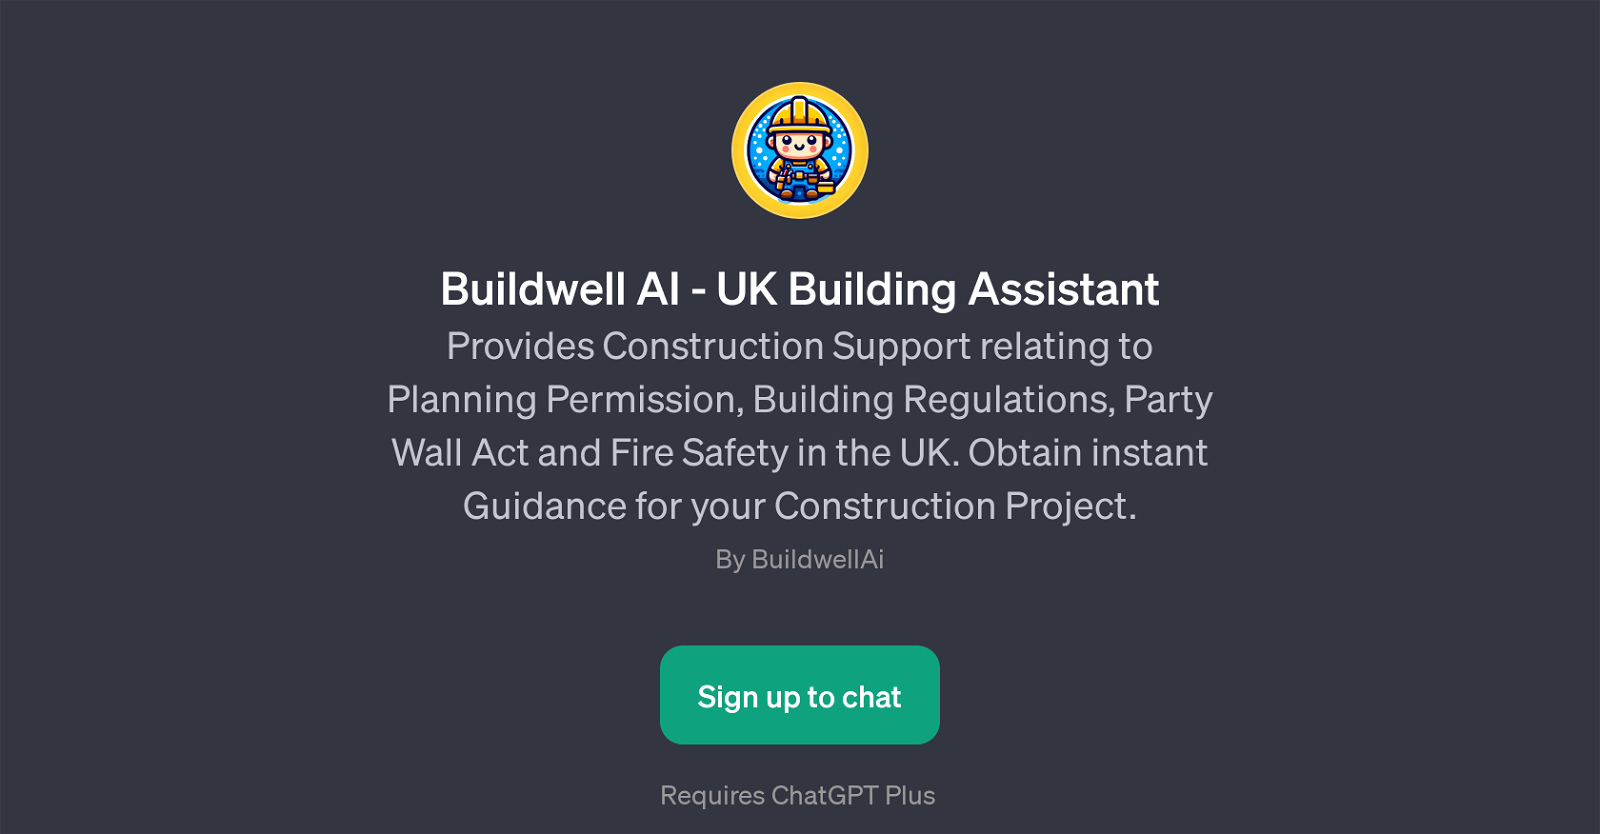 Buildwell AI - UK Building Assistant website